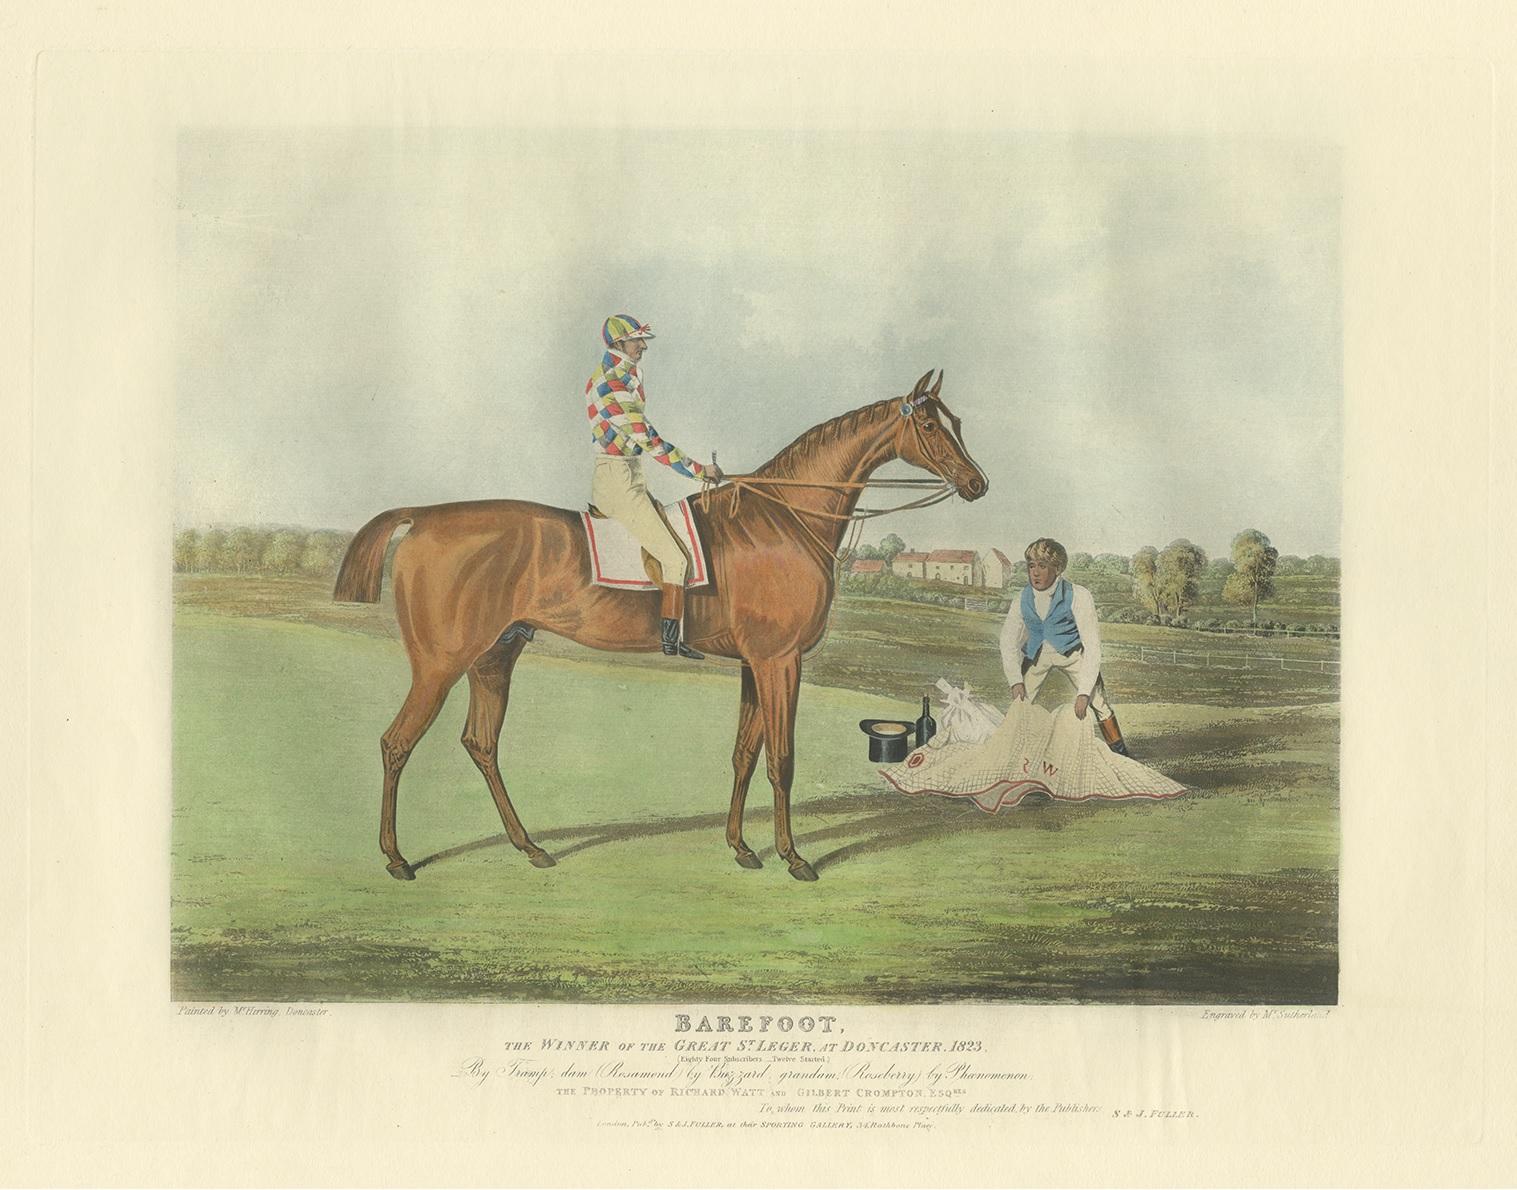 Antique horse print titled 'Barefoot, the winner of the Great St. Leger at Doncaster, 1823'. This aquatint print shows a winning horse and jockey of the Great St. Leger Stakes at Doncaster. Army officer, MP for Grimsby (1768–74) and racing